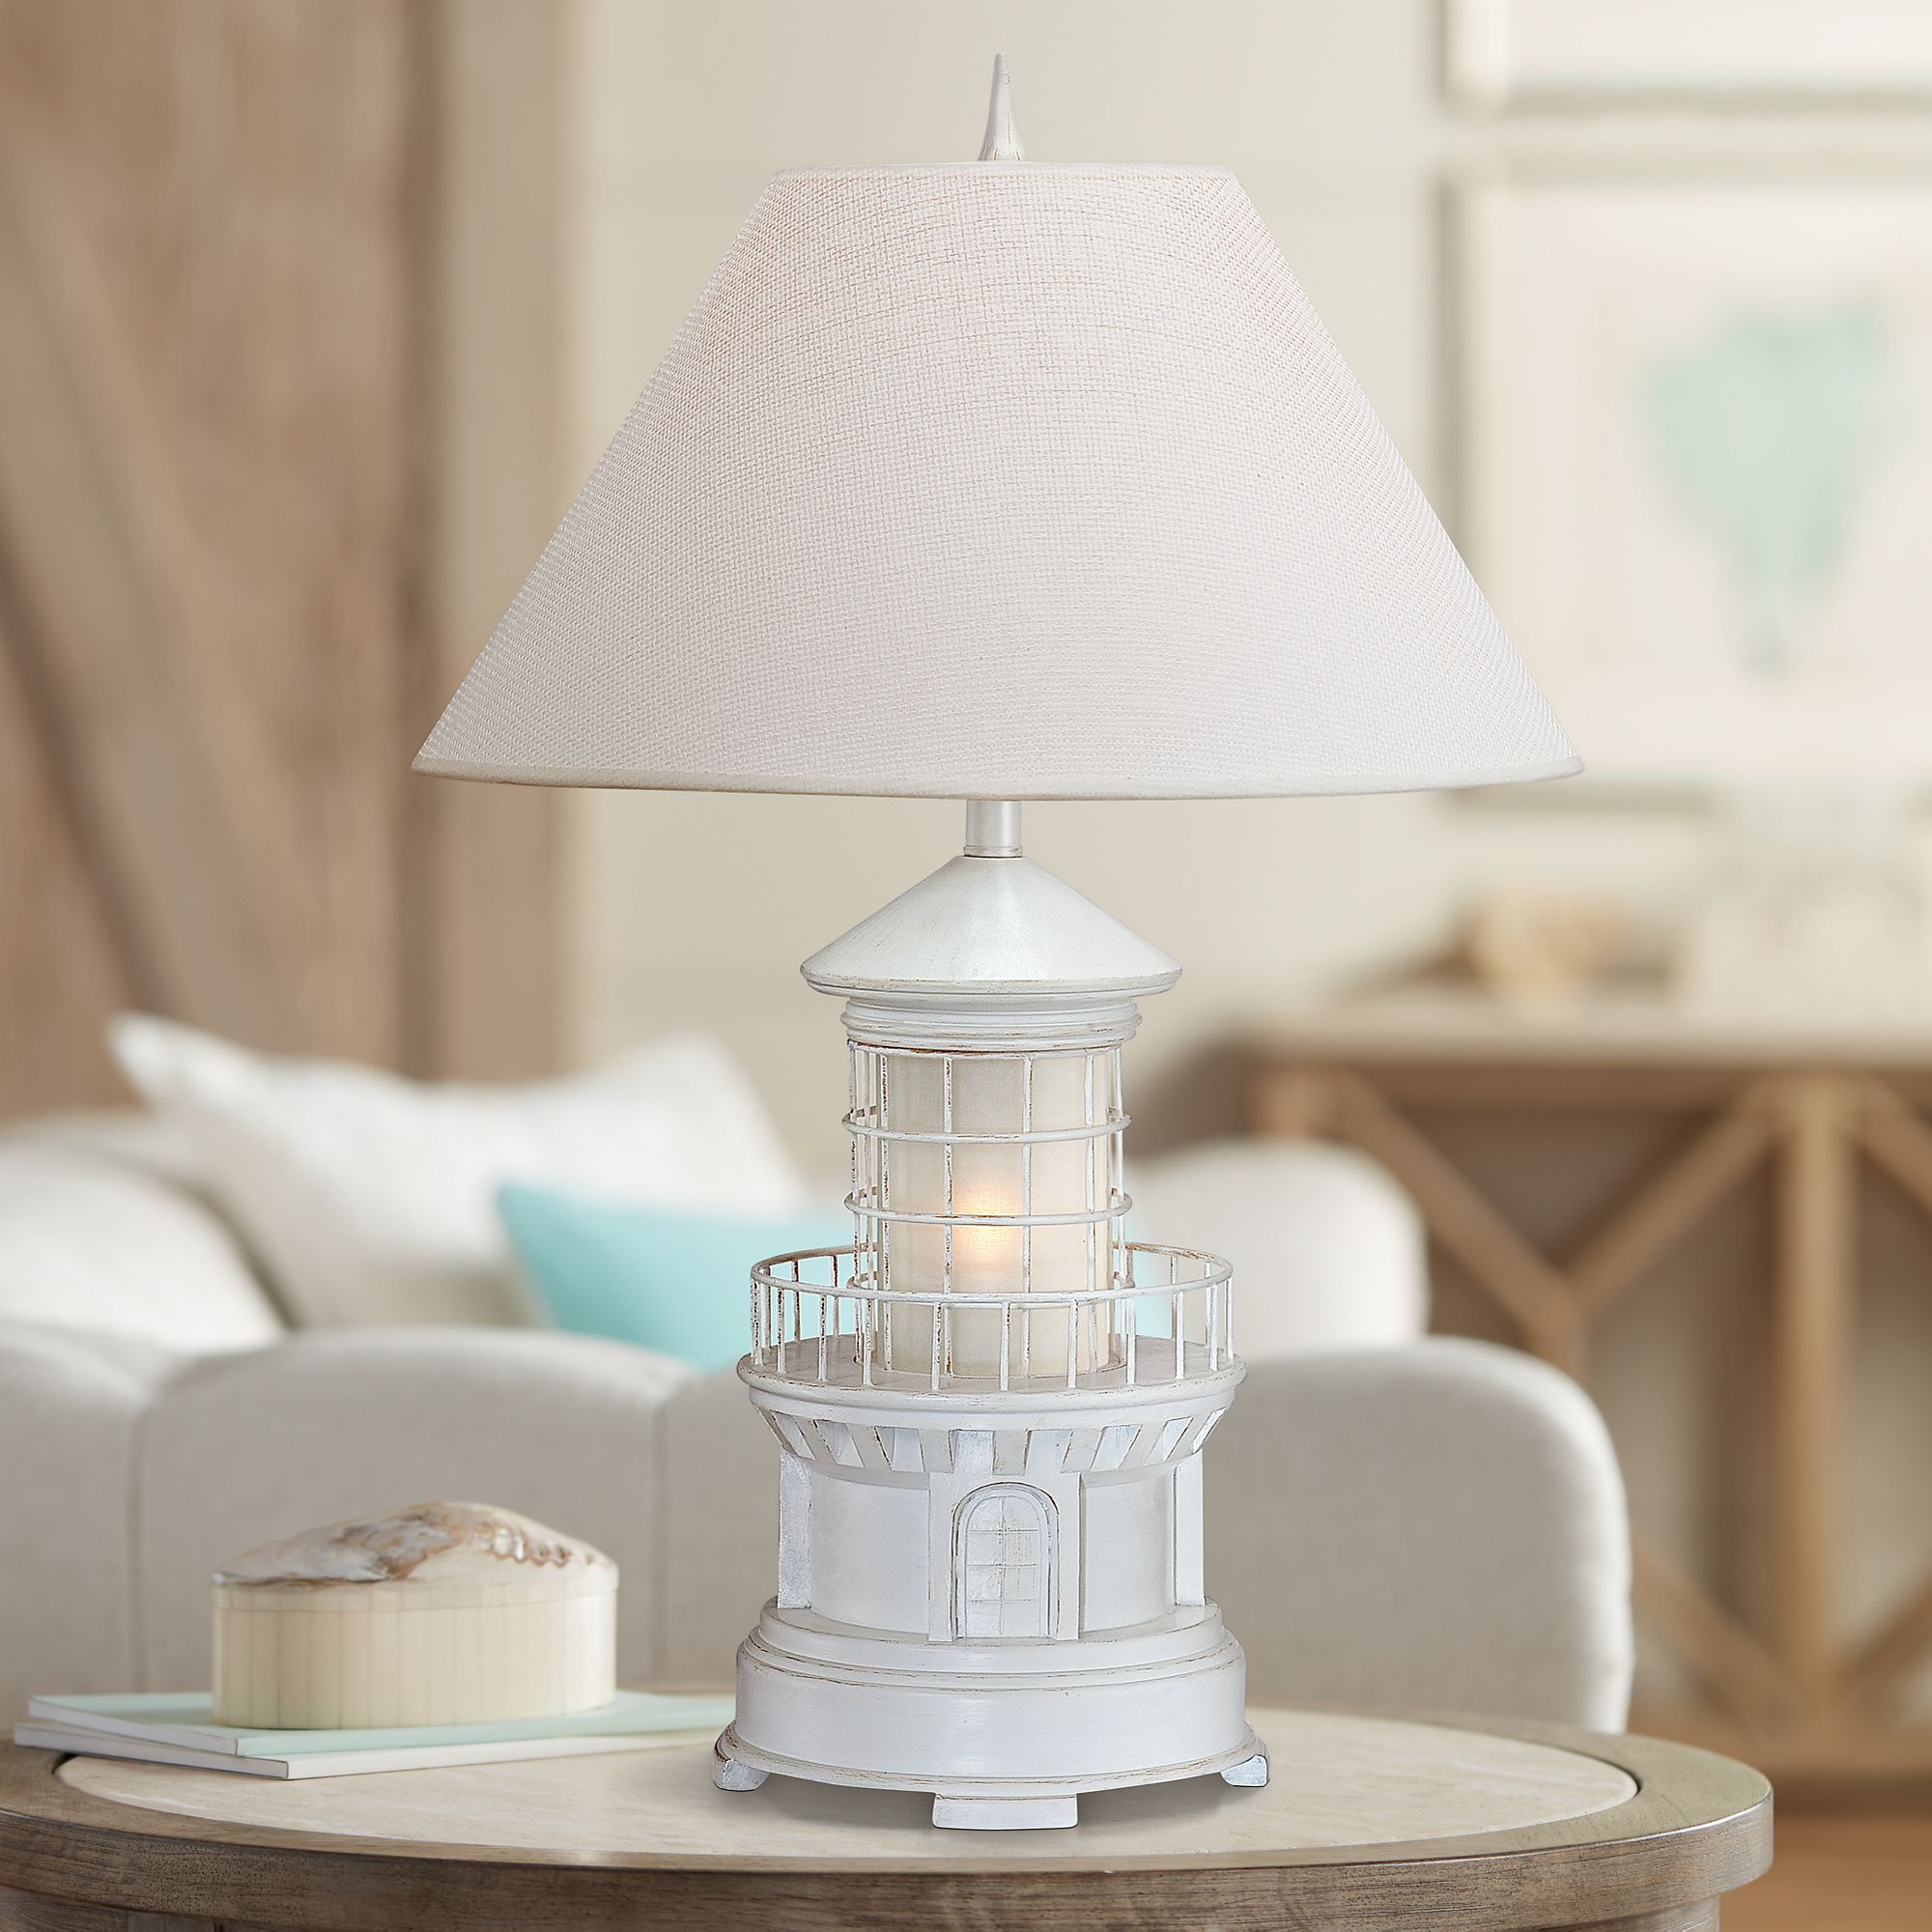 lighthouse table lamp with night light